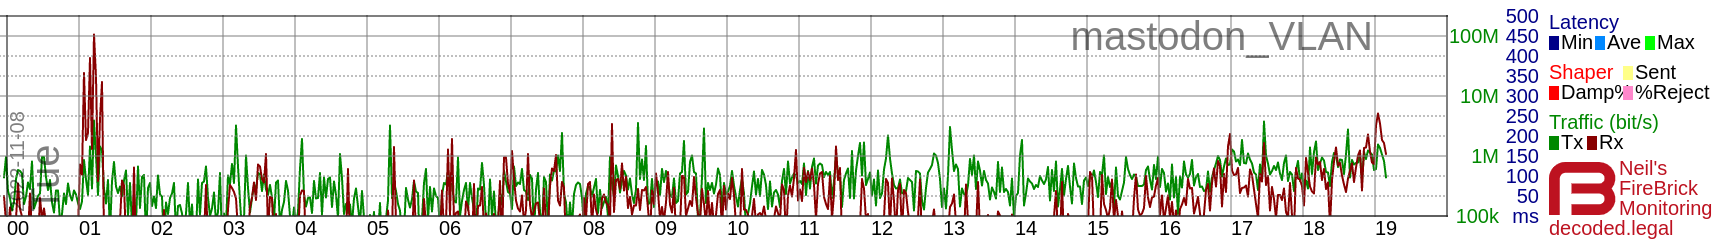 Screenshot of a network graph. It shows an average network throughput of roughly 1Mbit from midnight until 19:00, after which it rises to about 10Mbit. There is a peak of 100Mbit at 01:00, which is probably a backup rather than mastodon traffic.